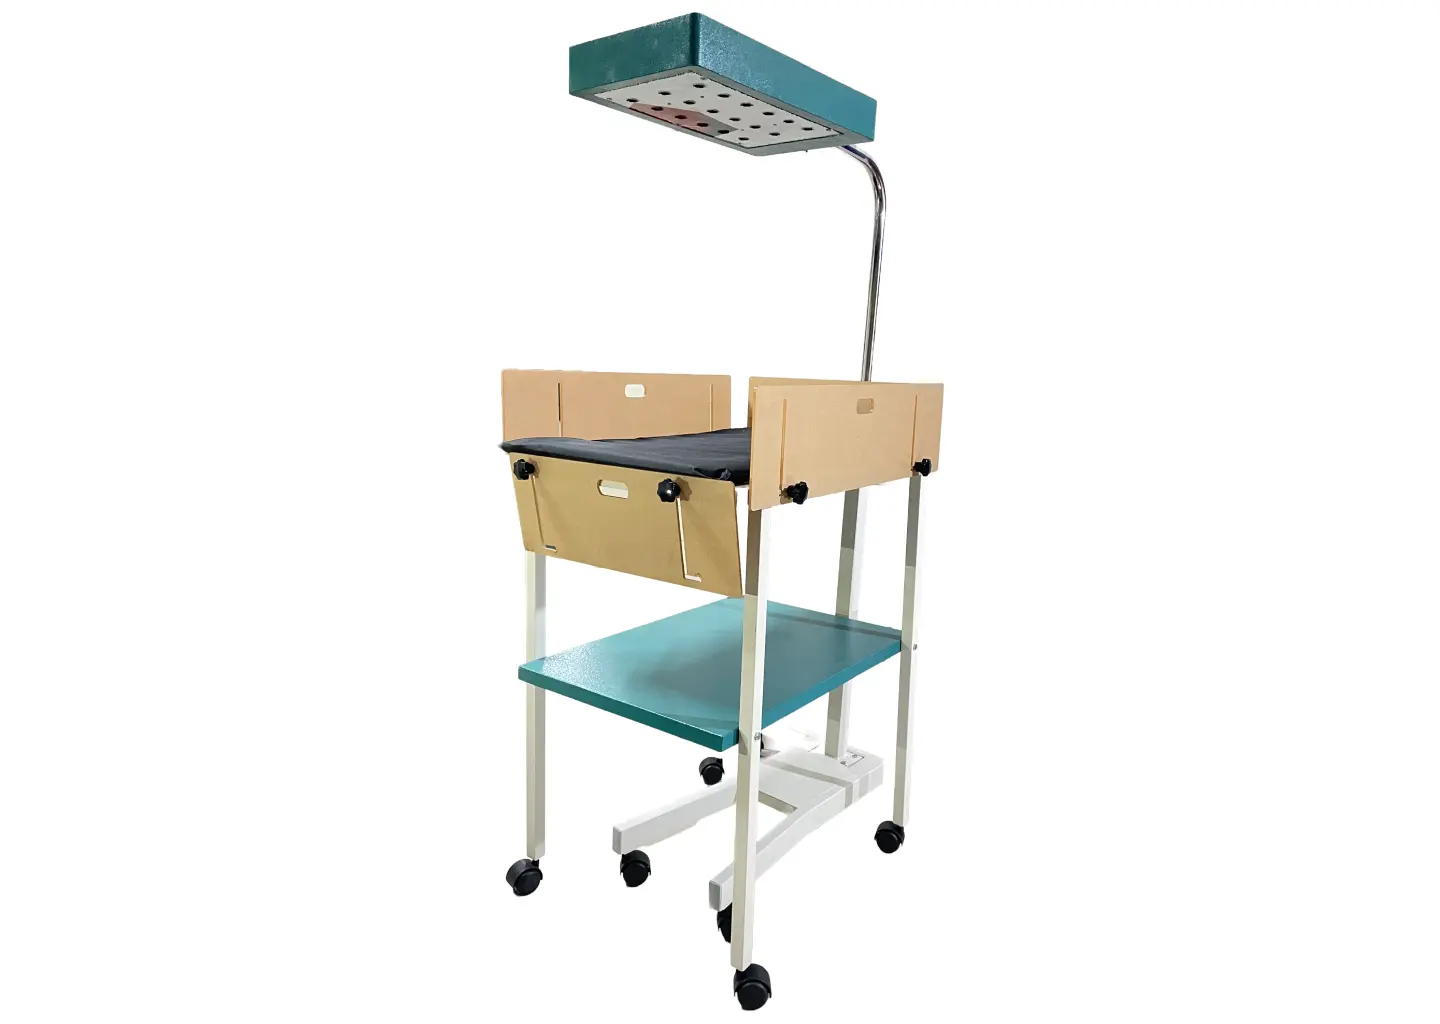 Aura Care's Single Surface LED Phototherapy With Trolley